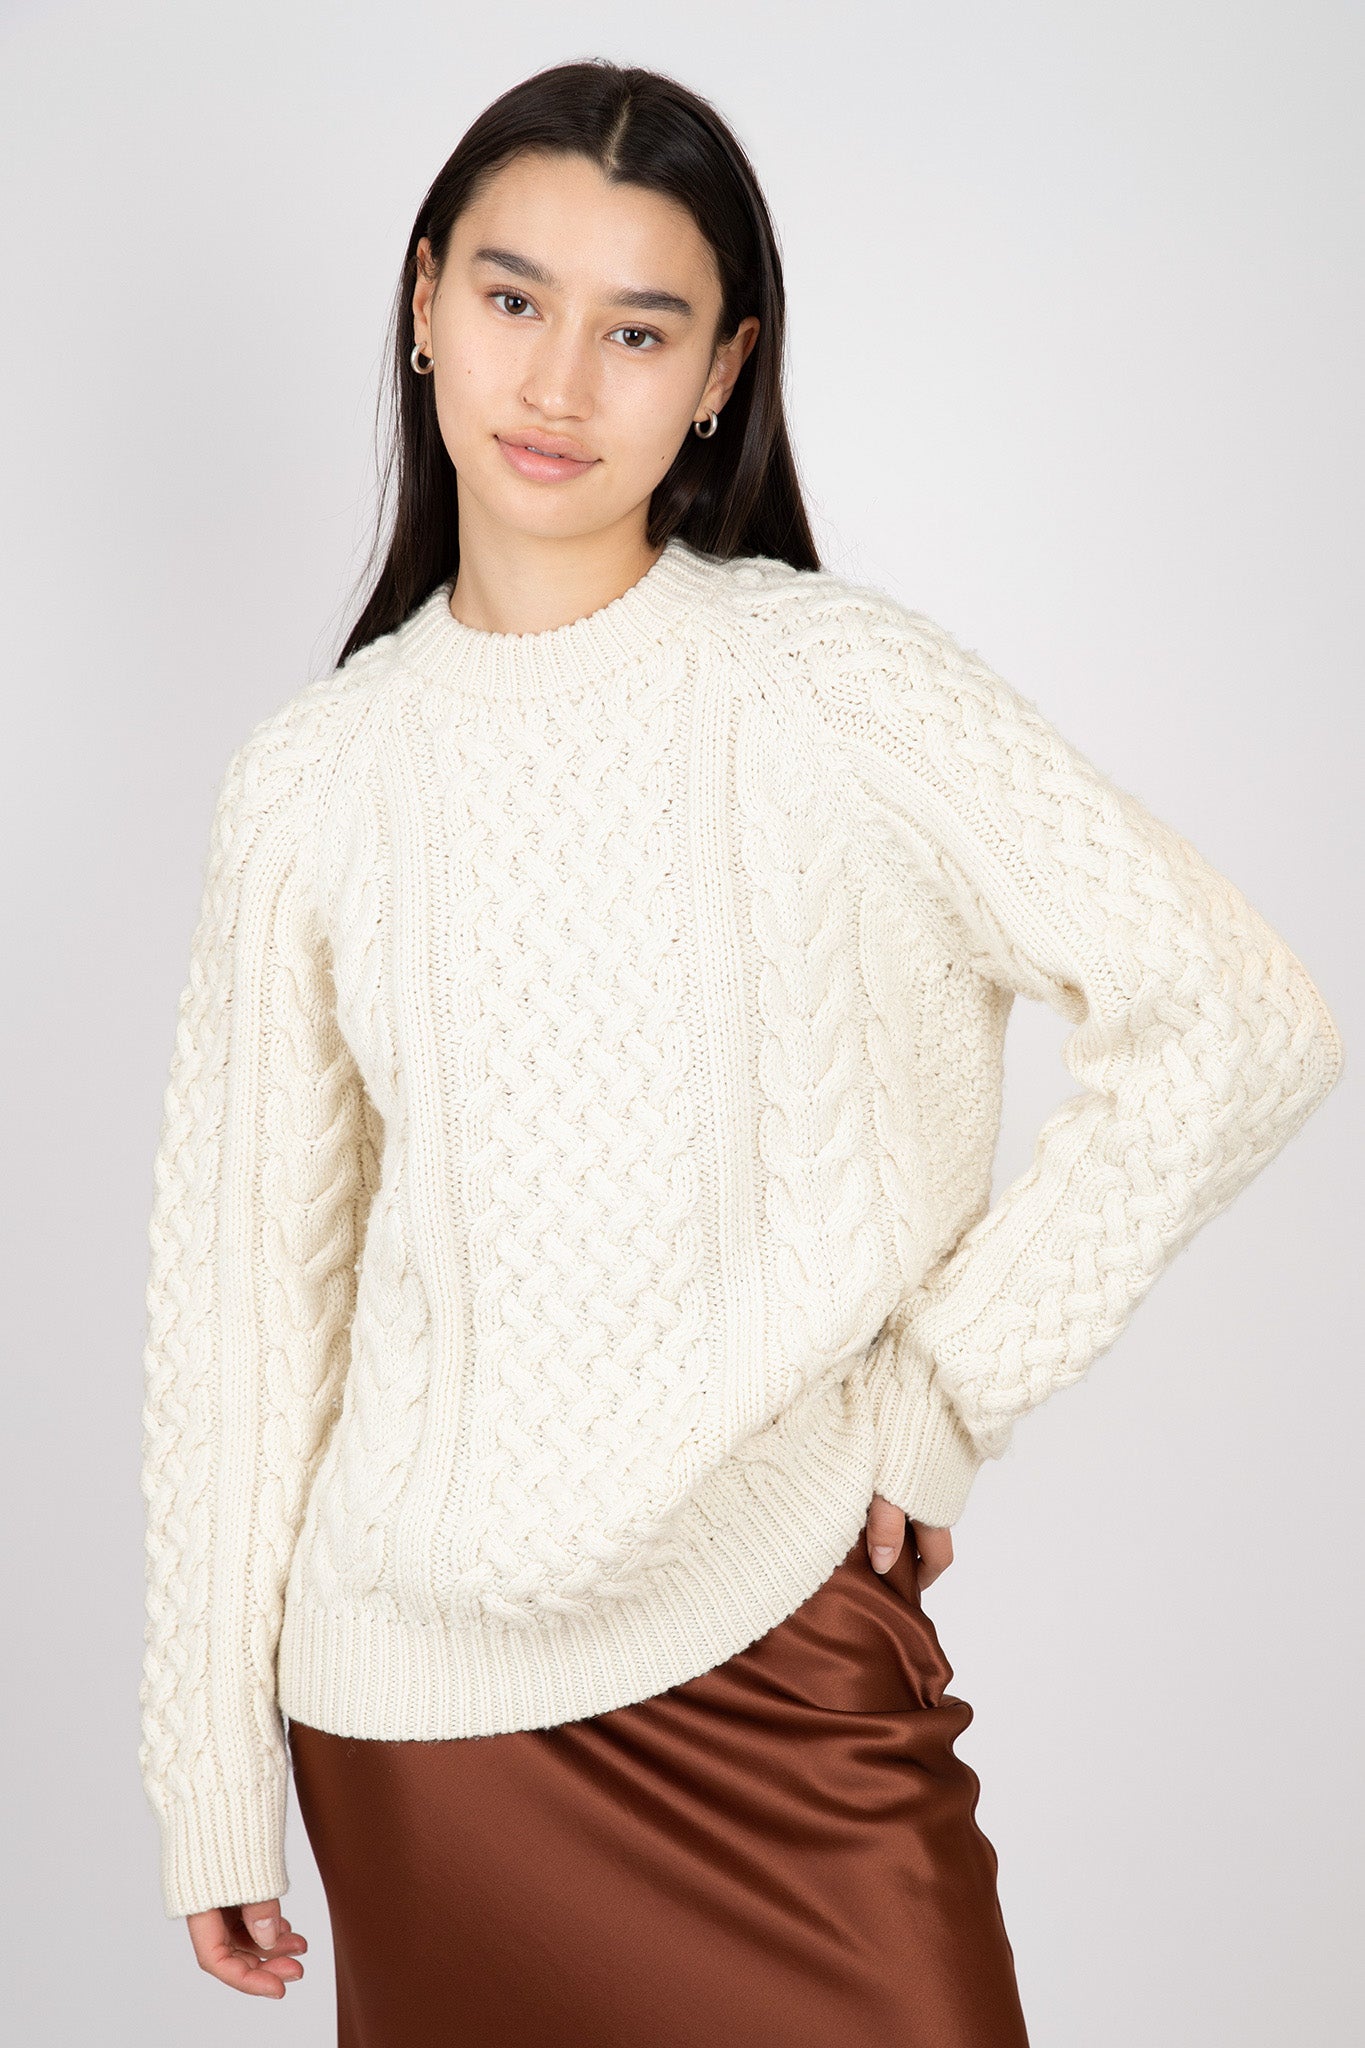 Bare Knitwear – Hill's Dry Goods